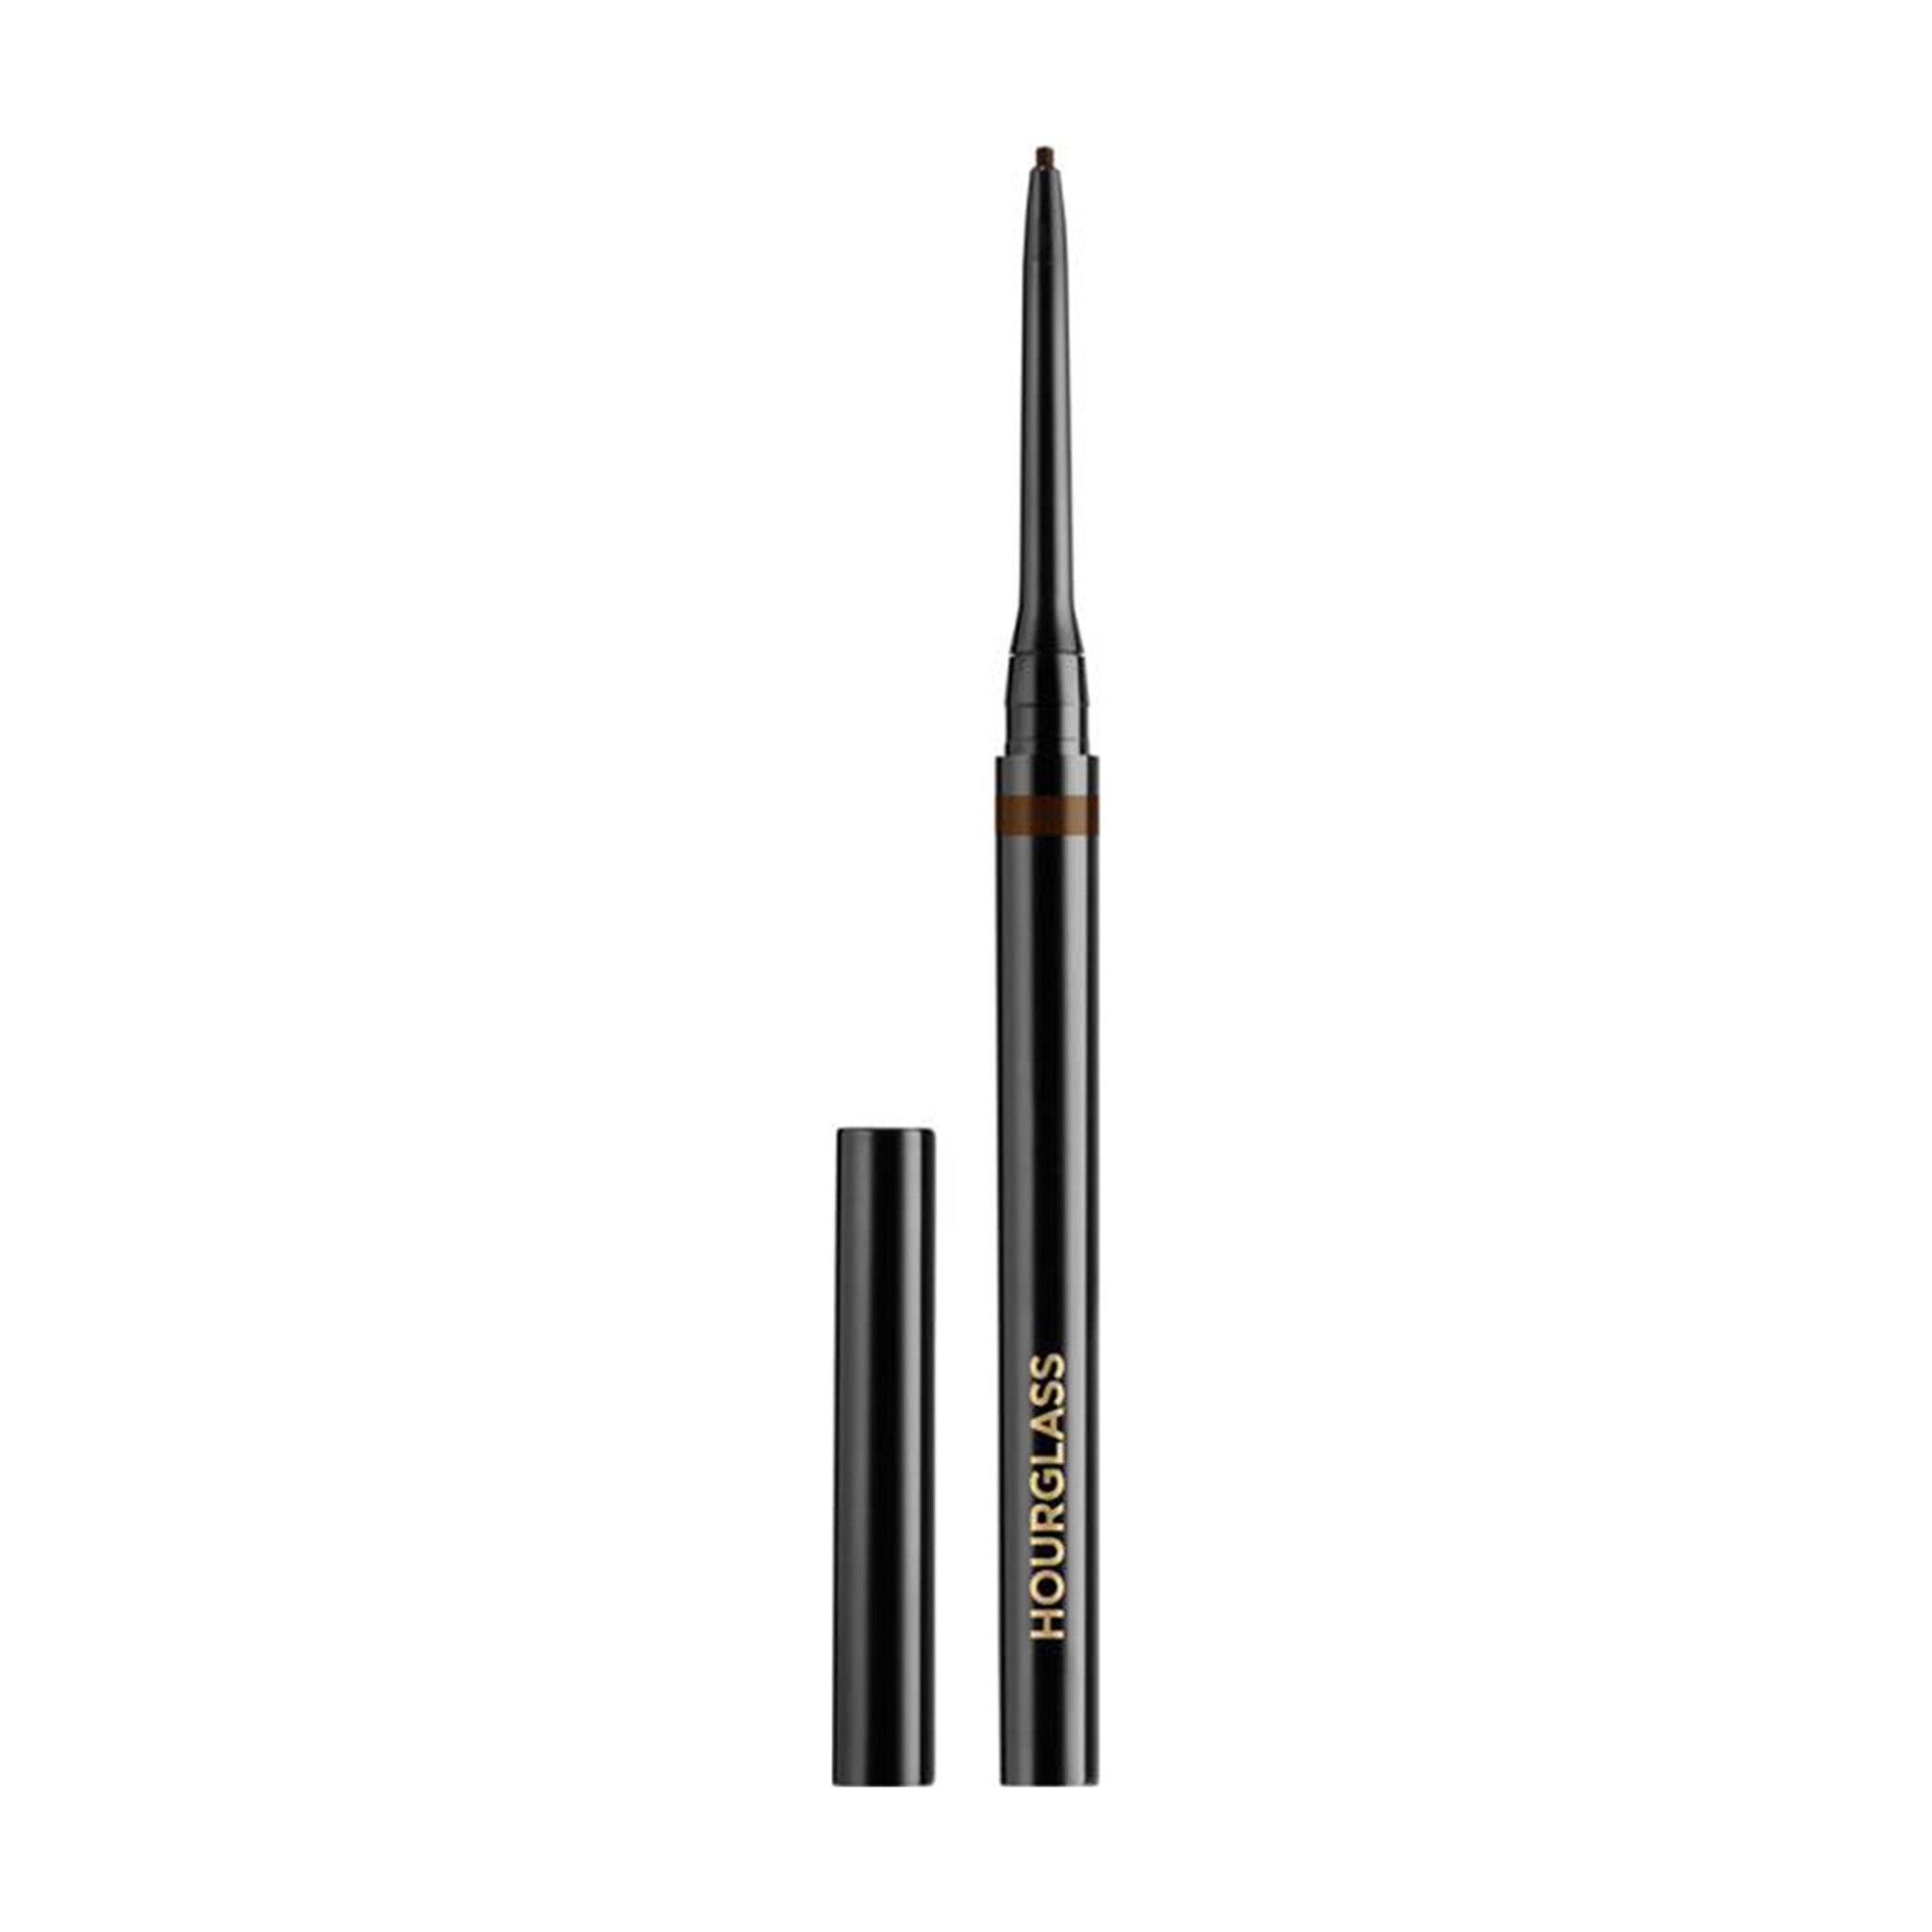 Hourglass 1.5MM Mechanical Gel Eye Liner Color/Shade variant: Bronze main image. This product is in the color bronze